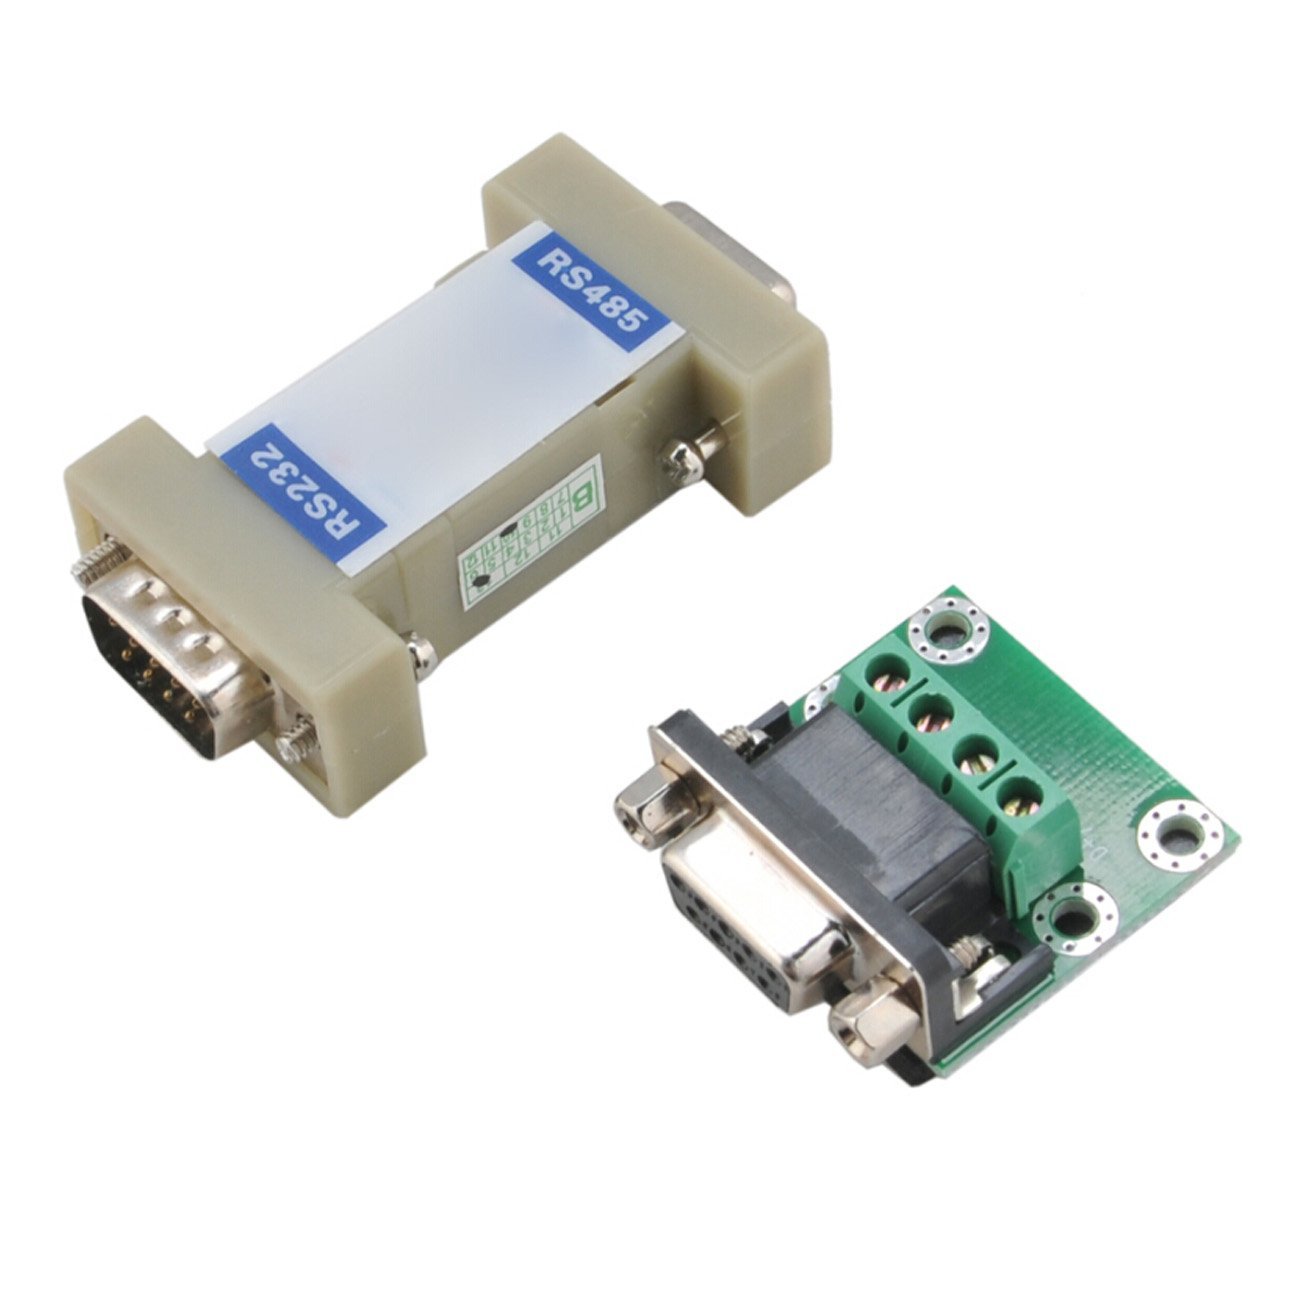 Optimal Shop RS-232 to RS-485 Adapter Interface Converter